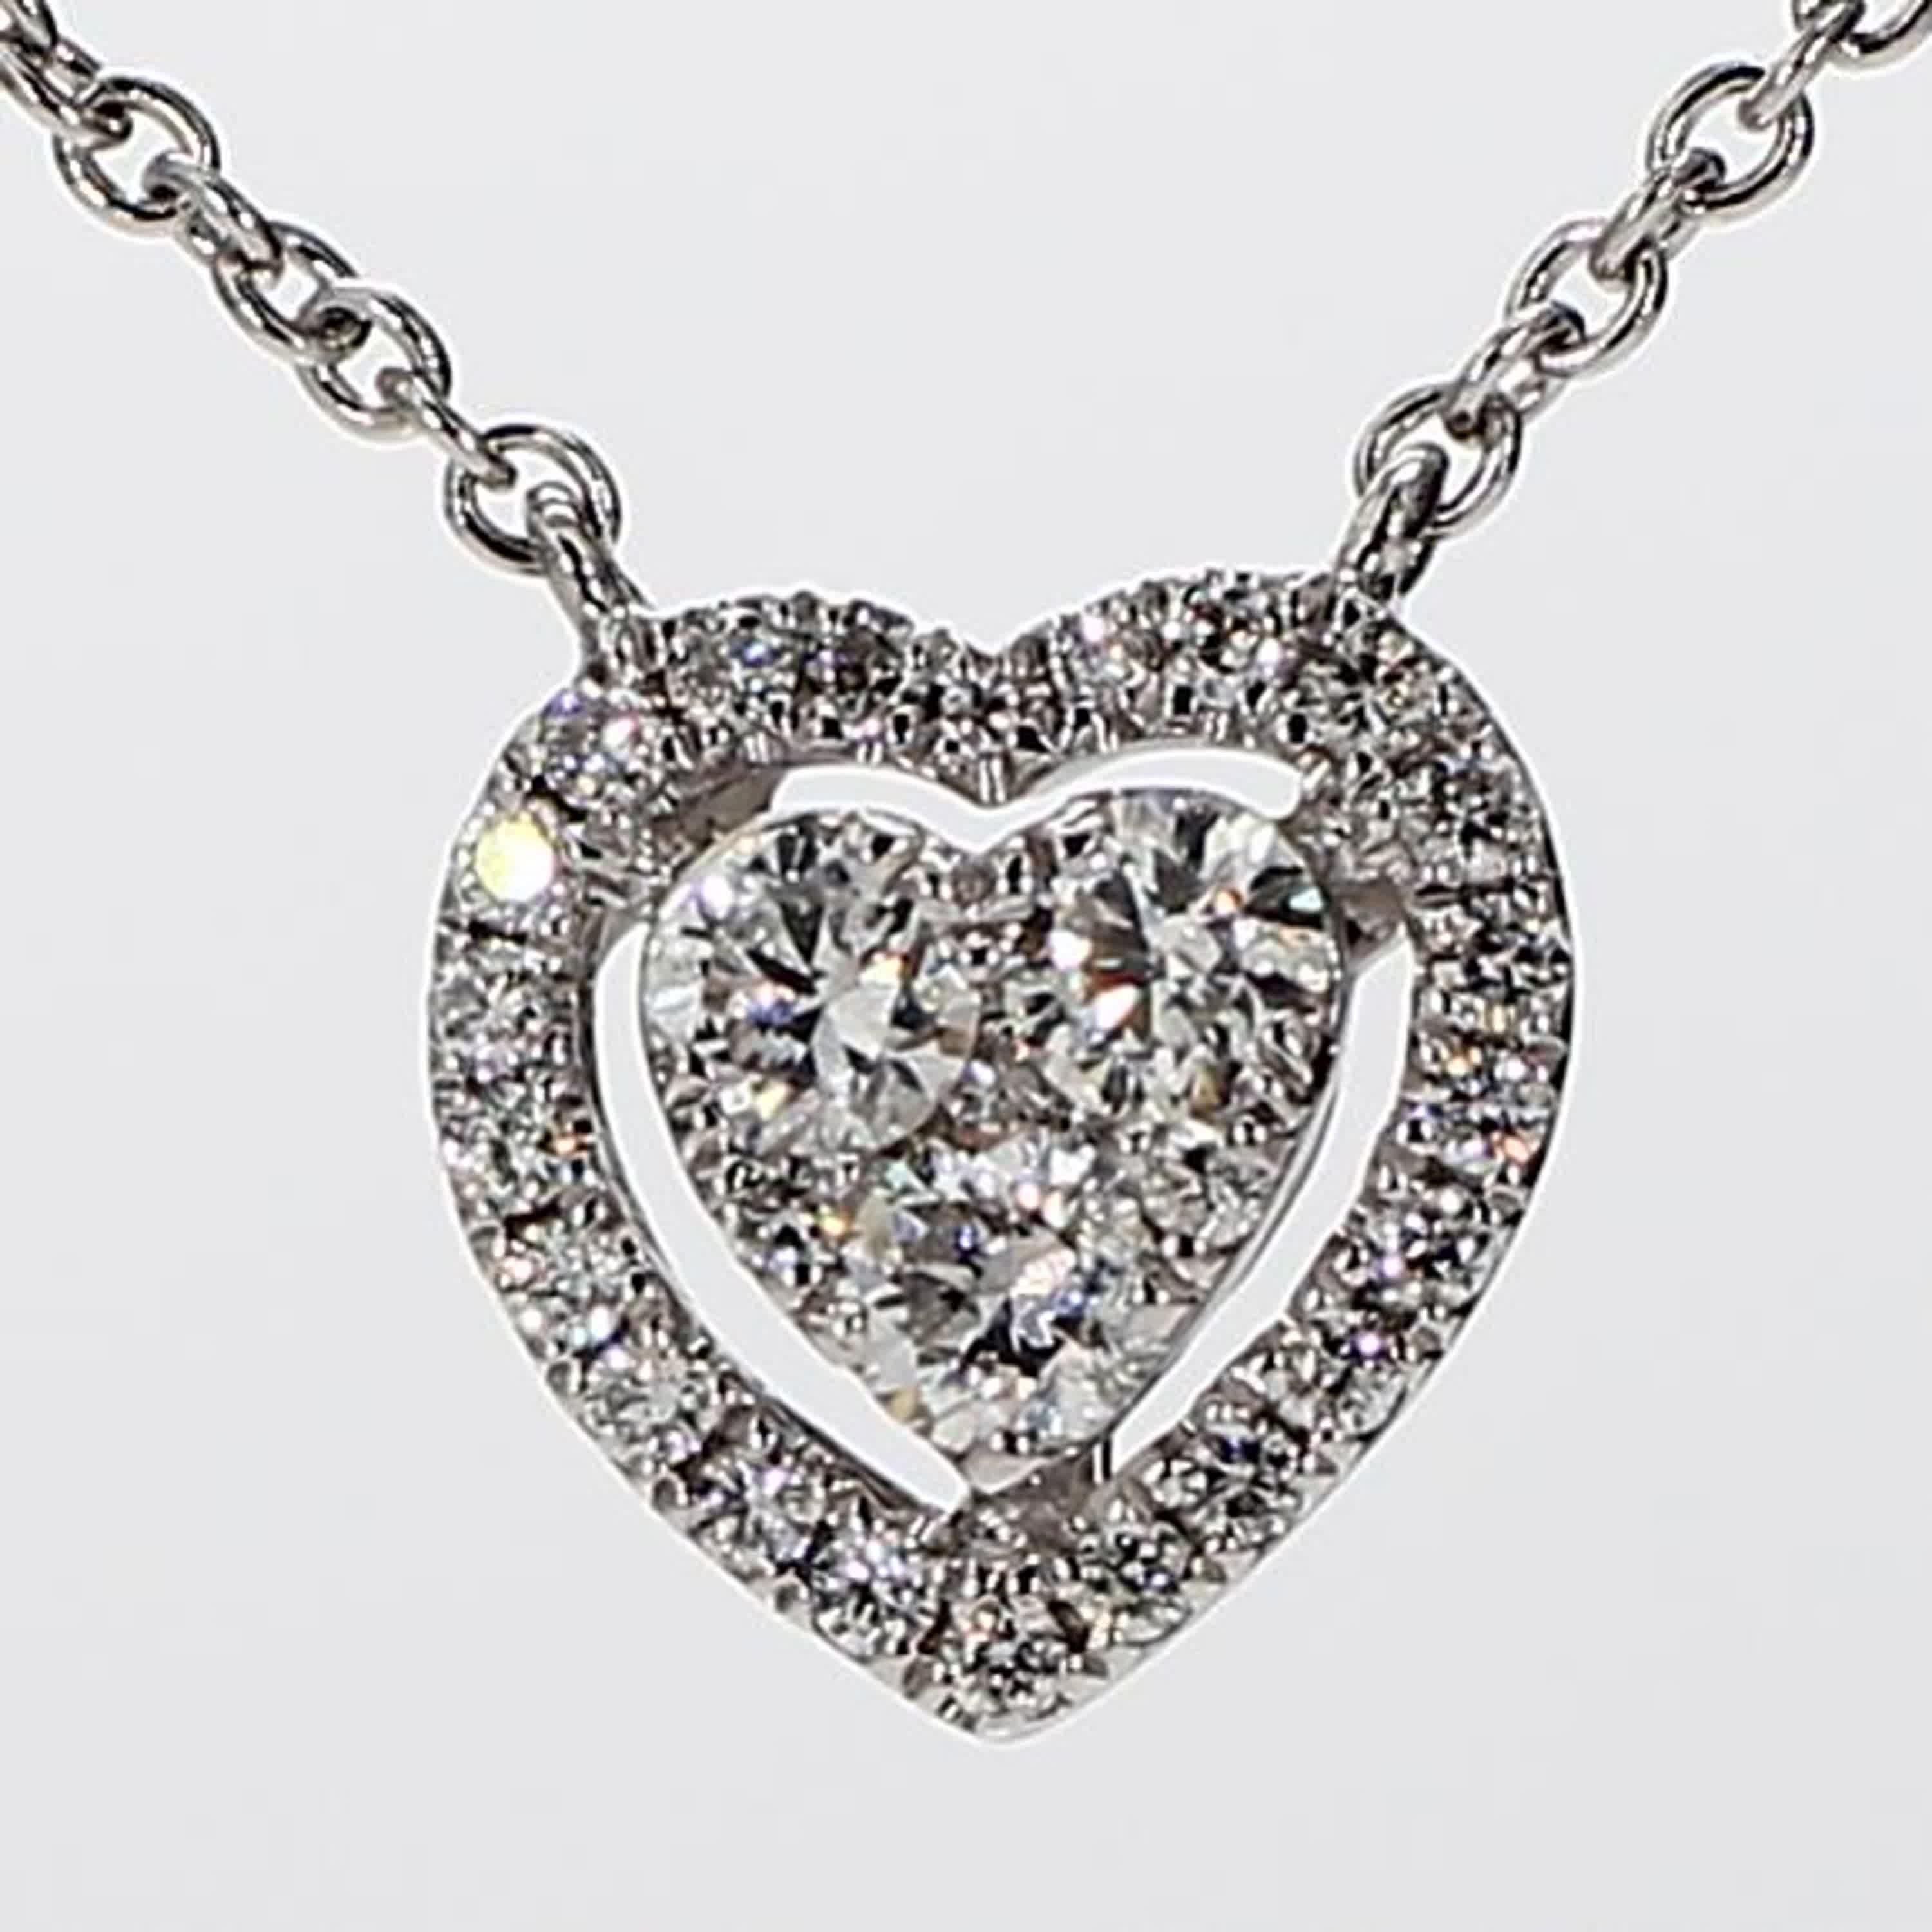 RareGemWorld's classic diamond pendant. Mounted in a beautiful 18K White Gold setting with natural round white diamond melee in a beautiful heart-shape. This pendant is guaranteed to impress and enhance your personal collection.

Total Weight: